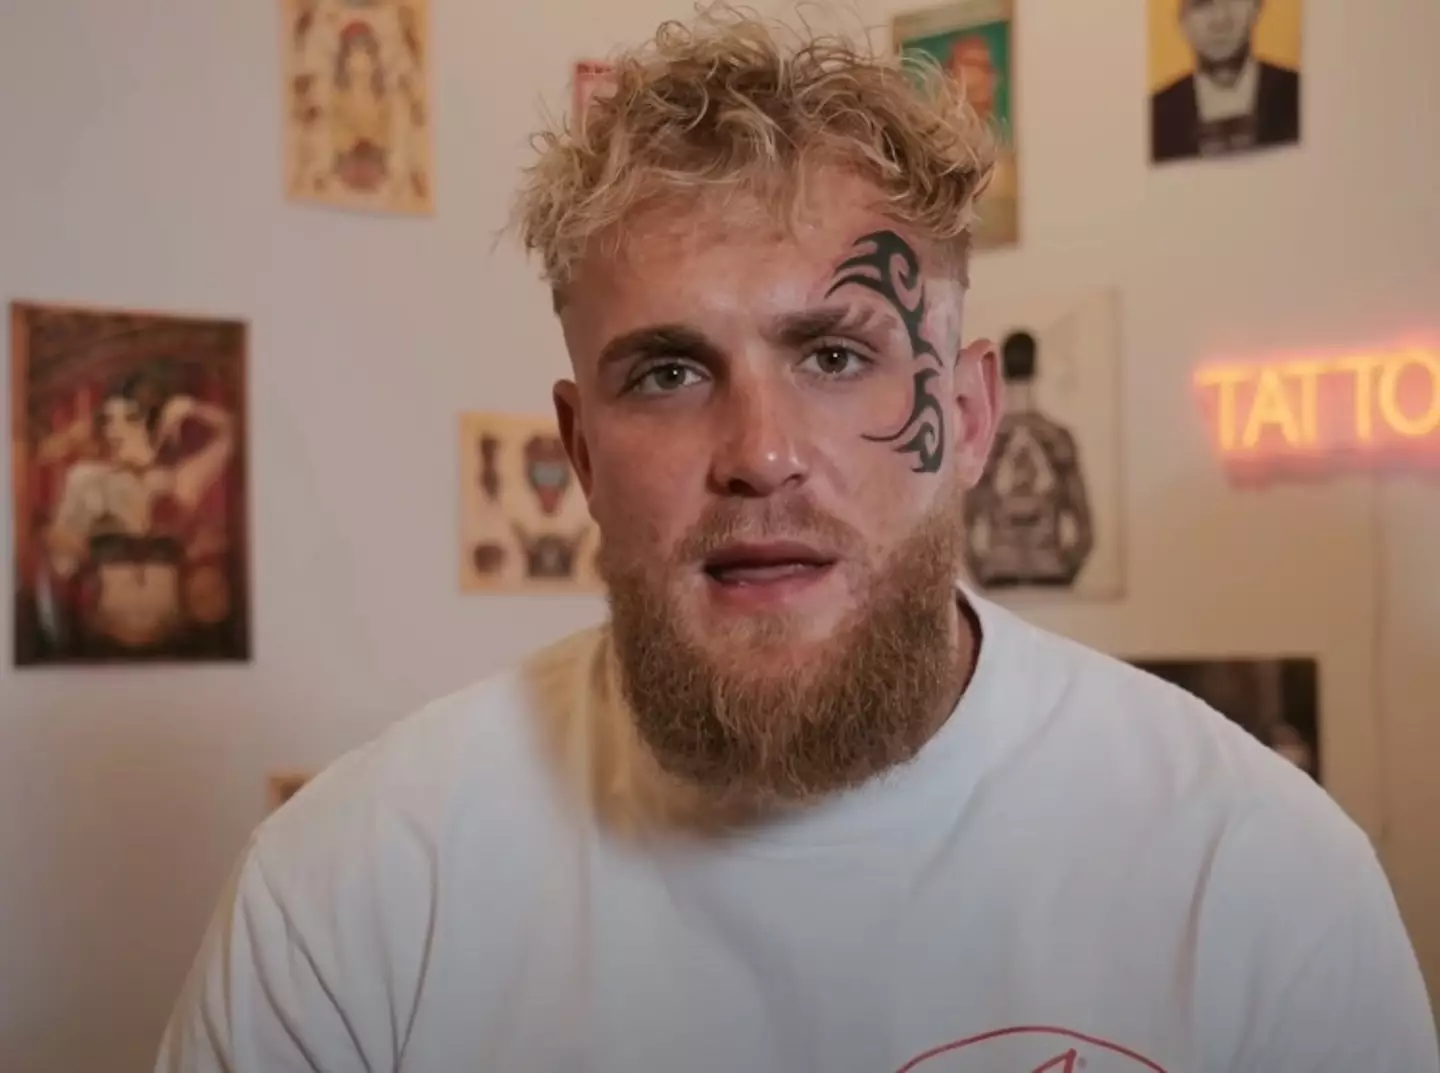 This will be Jake Paul's second fight this year.